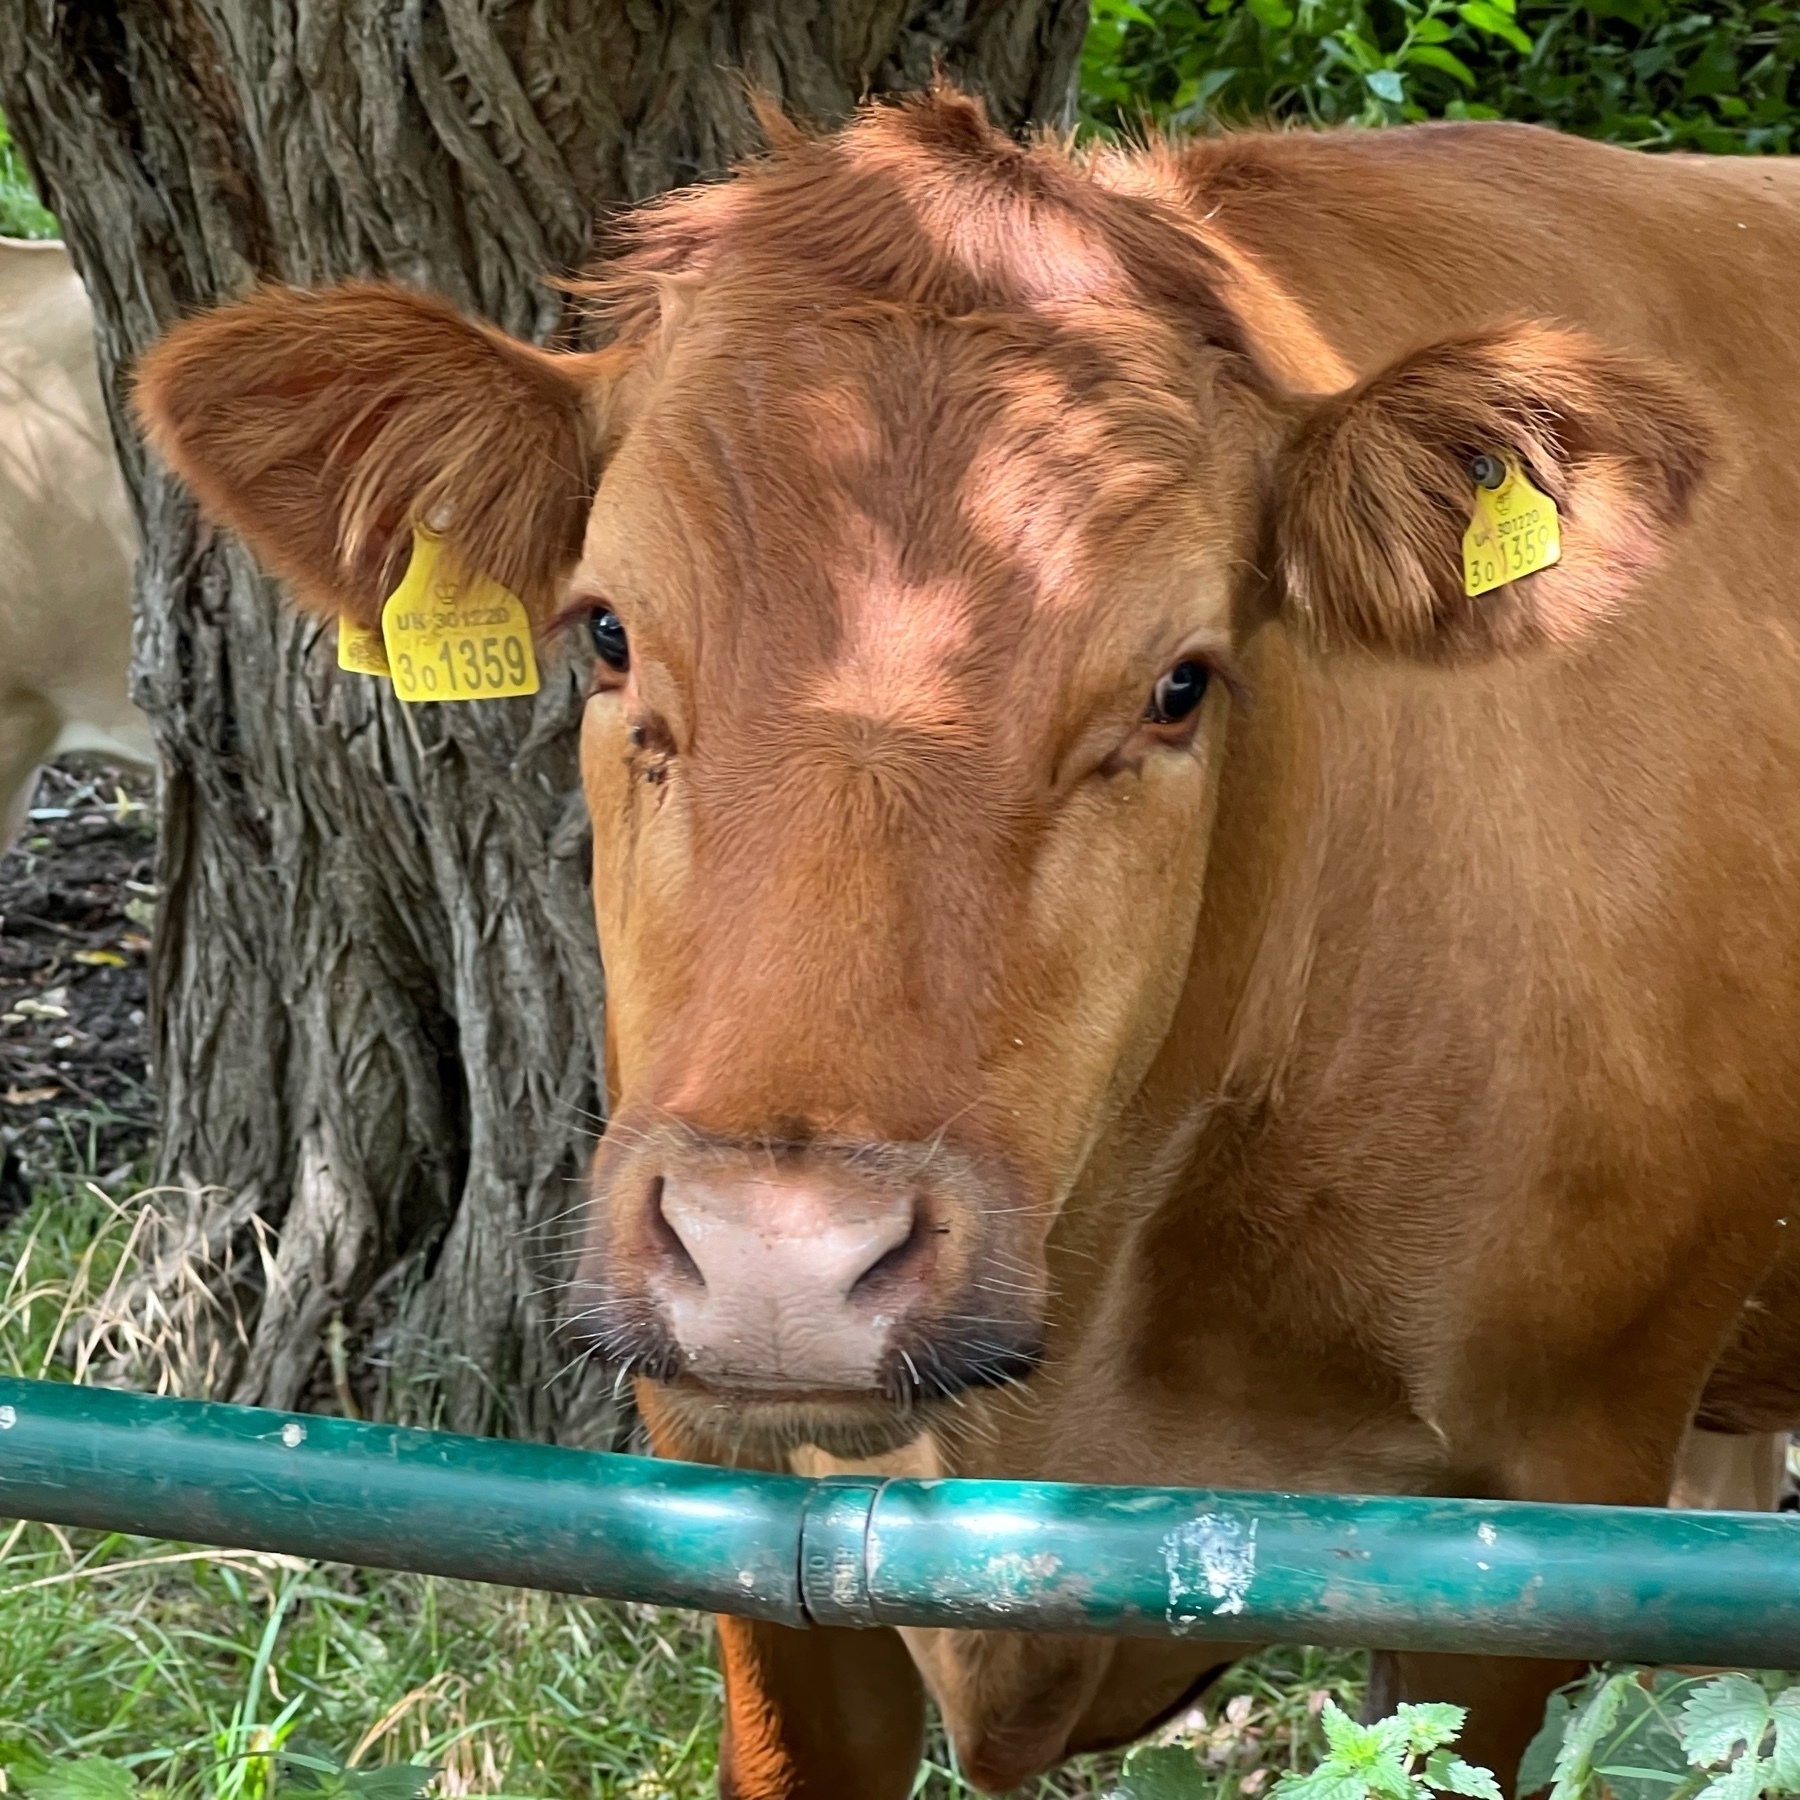 brown cow with yellow ear tags, looking right into the camera